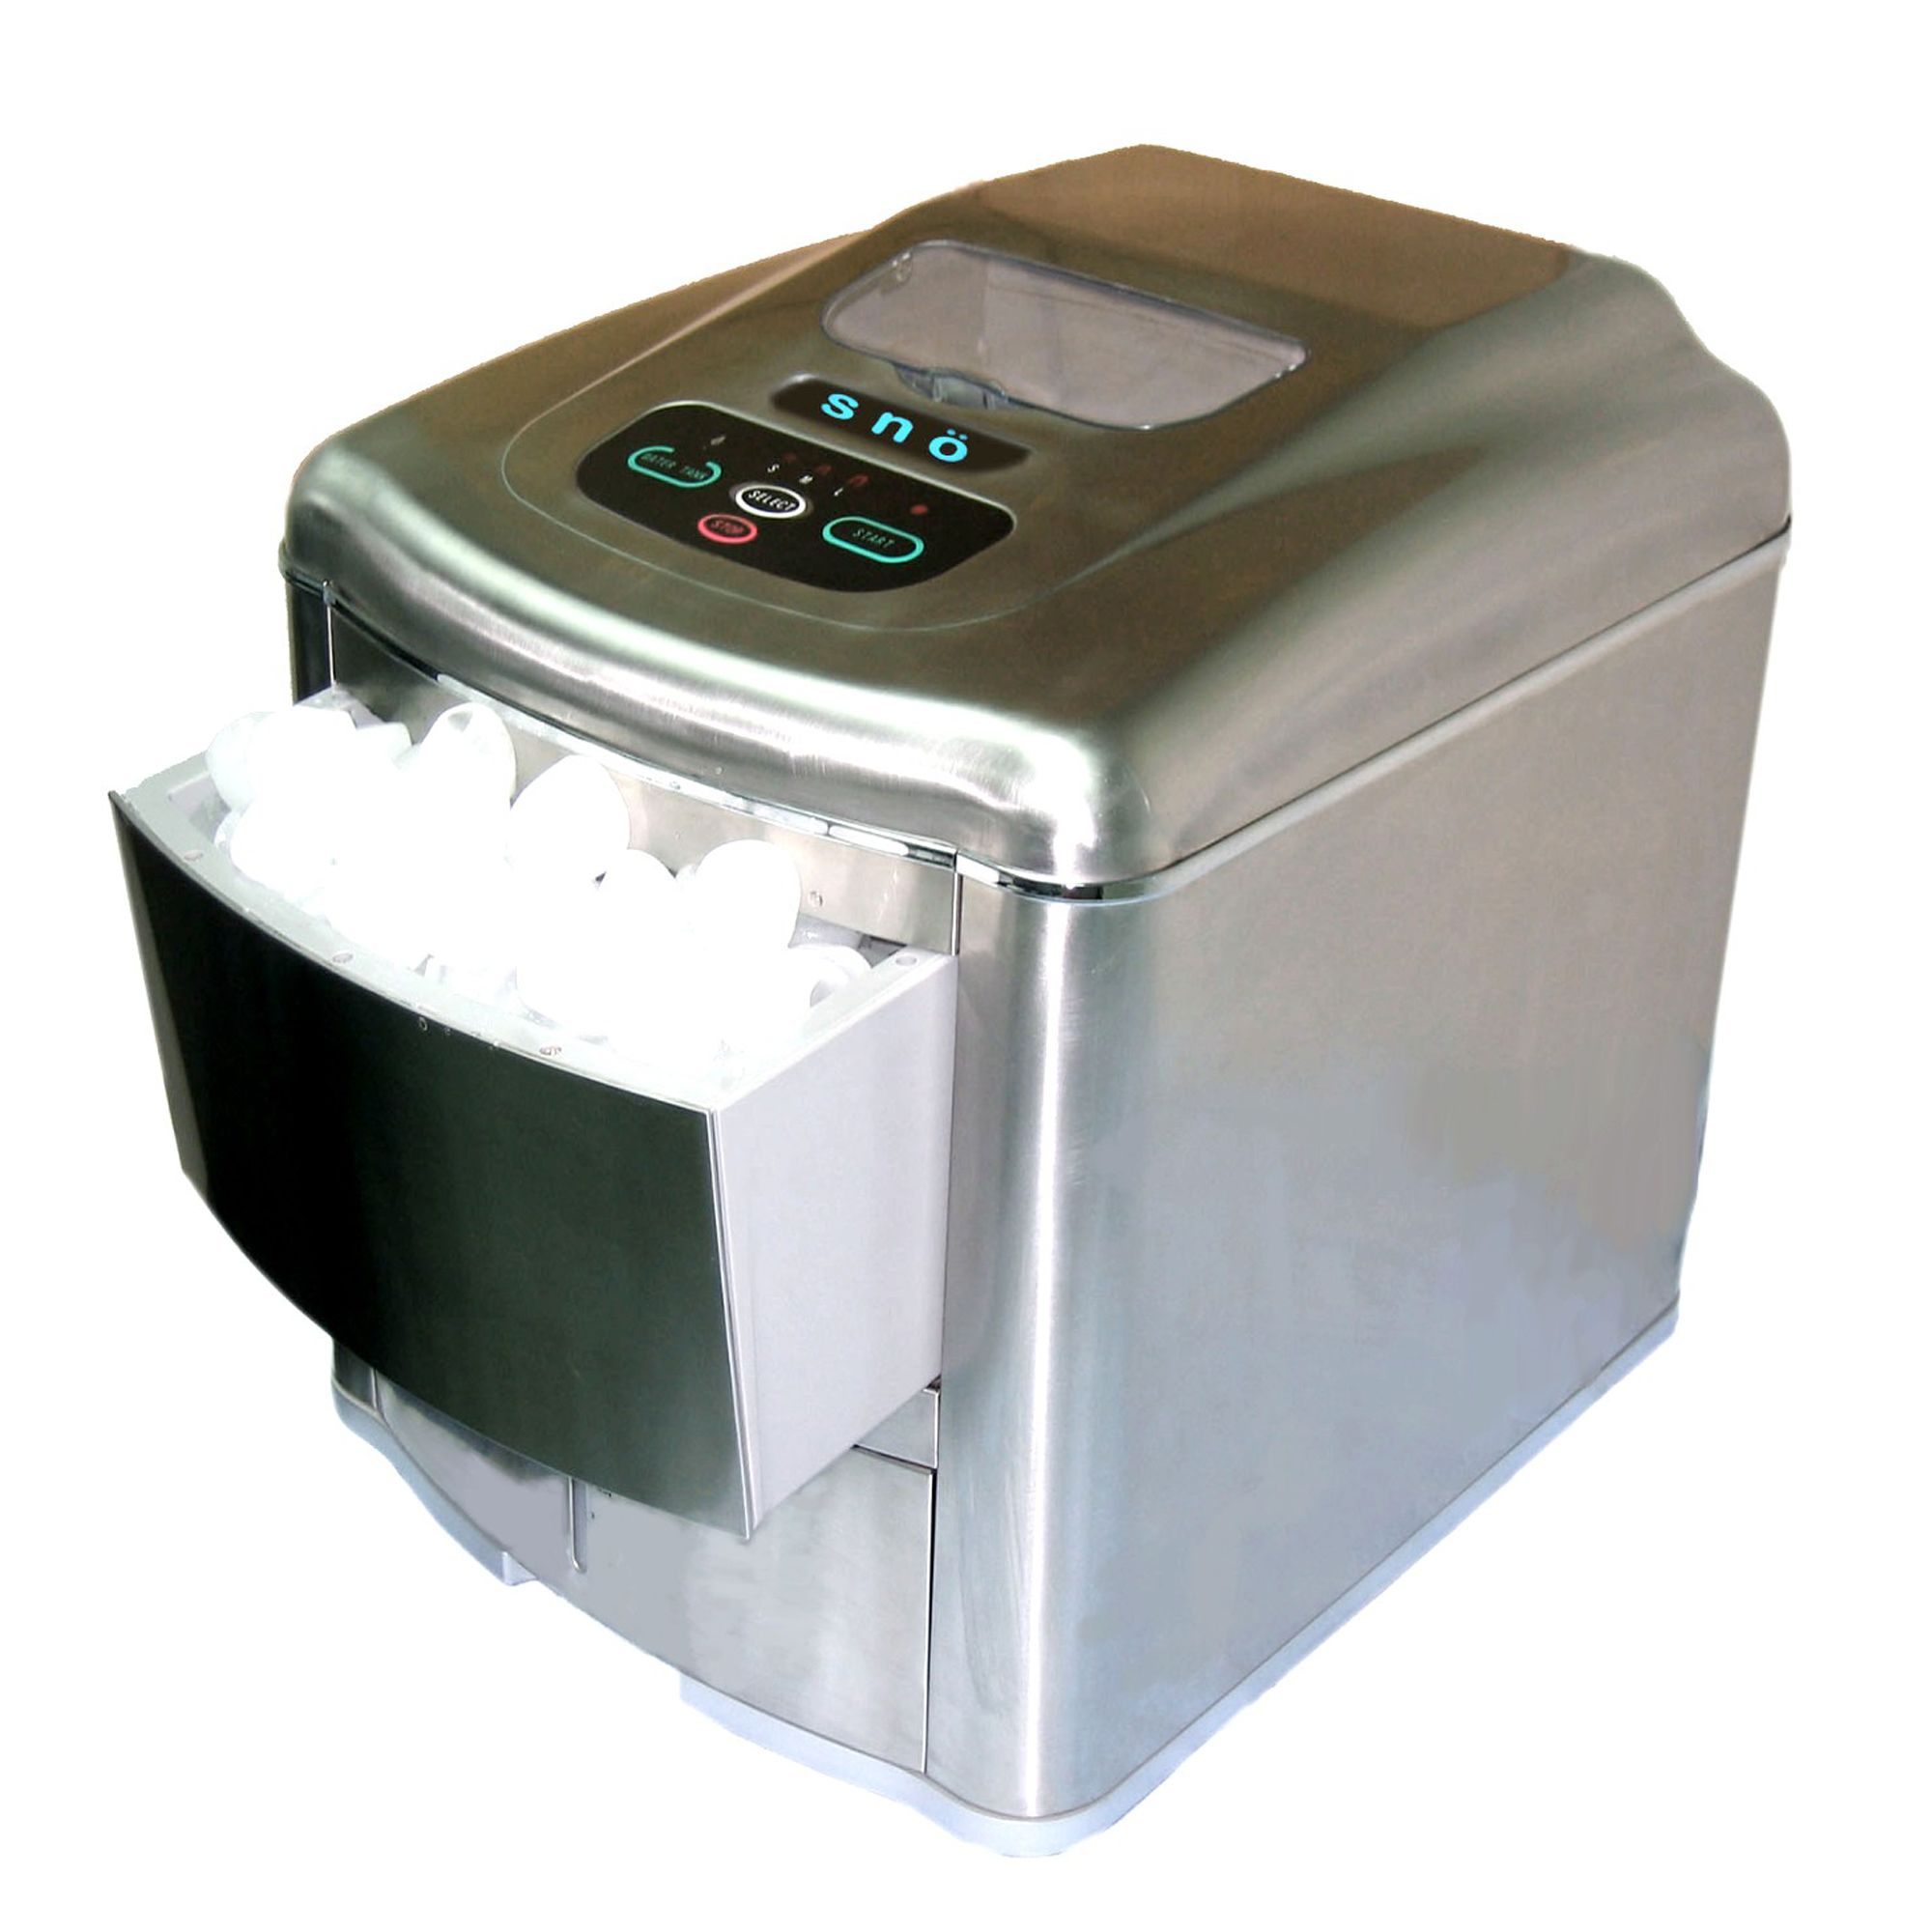 Whynter SNO Portable Ice Maker - Stainless Steel BRUSHED NICKEL FINISH